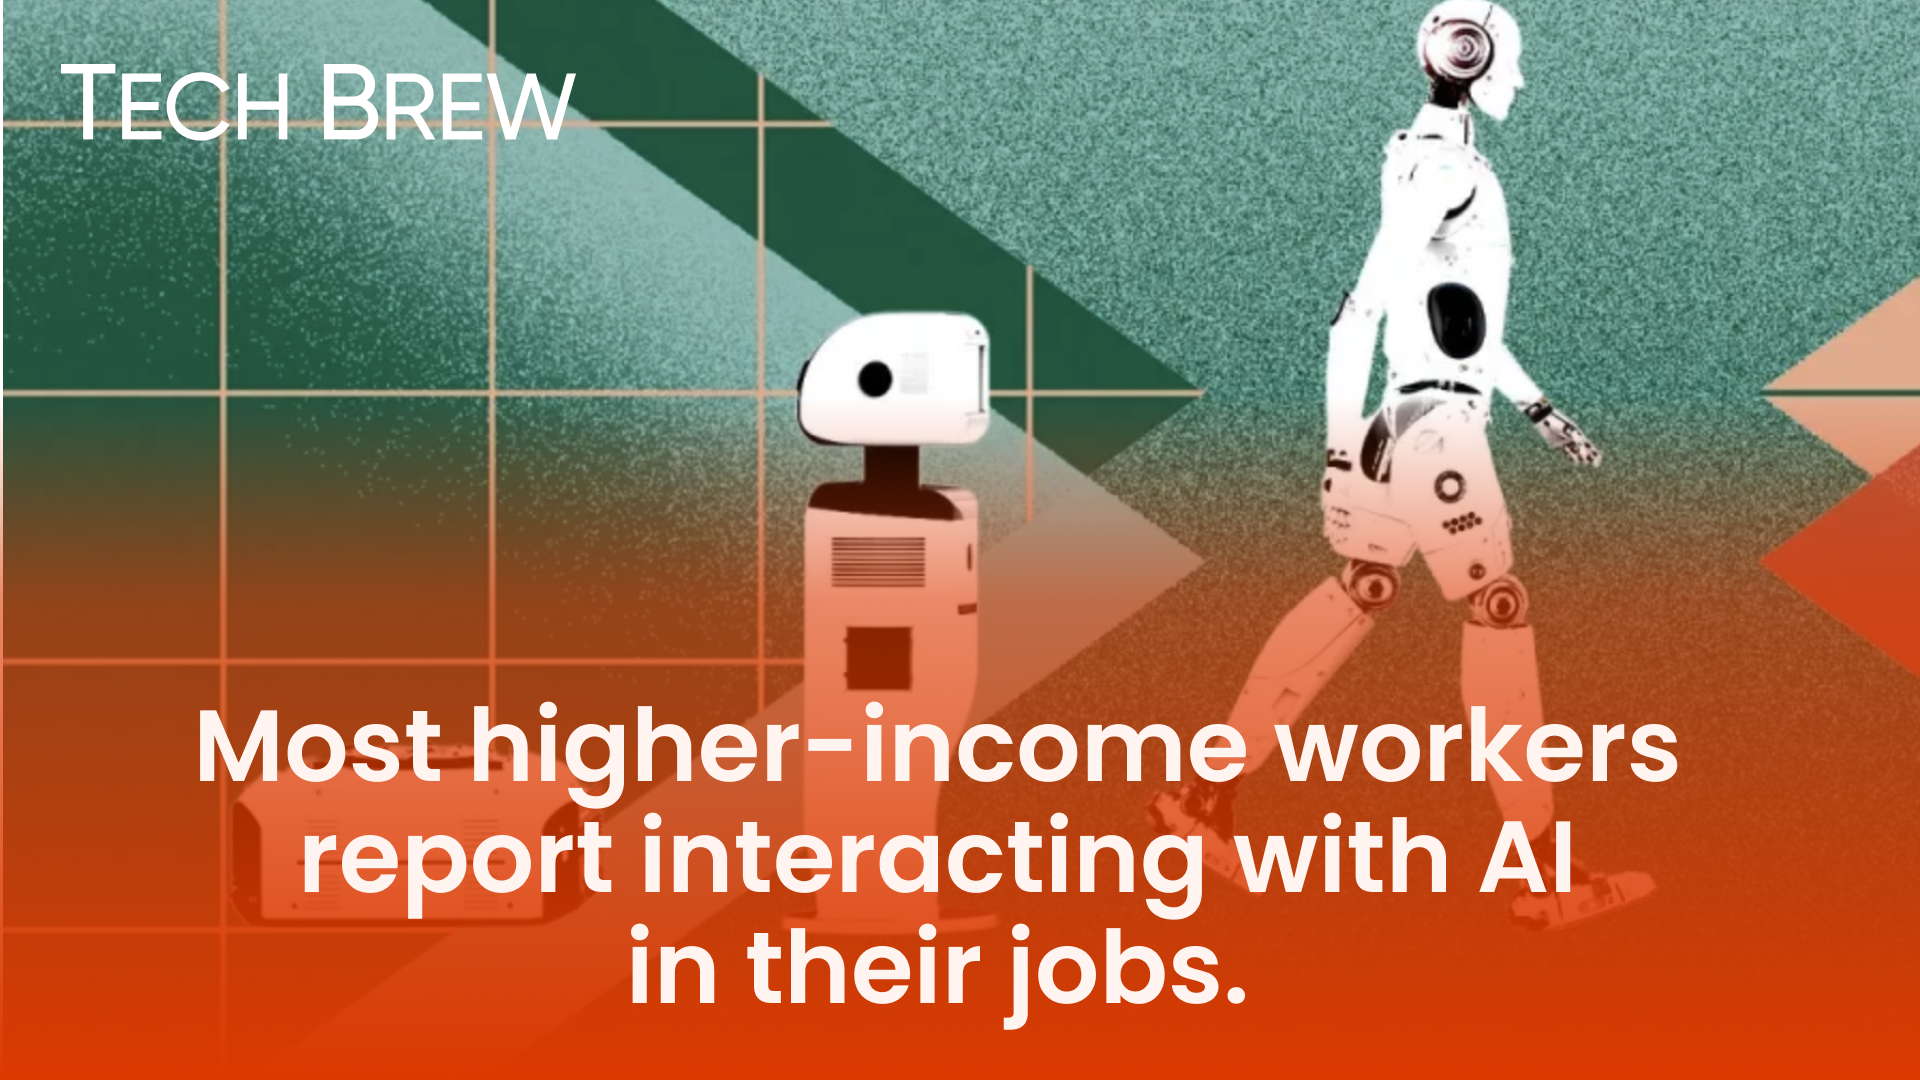 Most higher-income workers report interacting with AI in their jobs, survey says